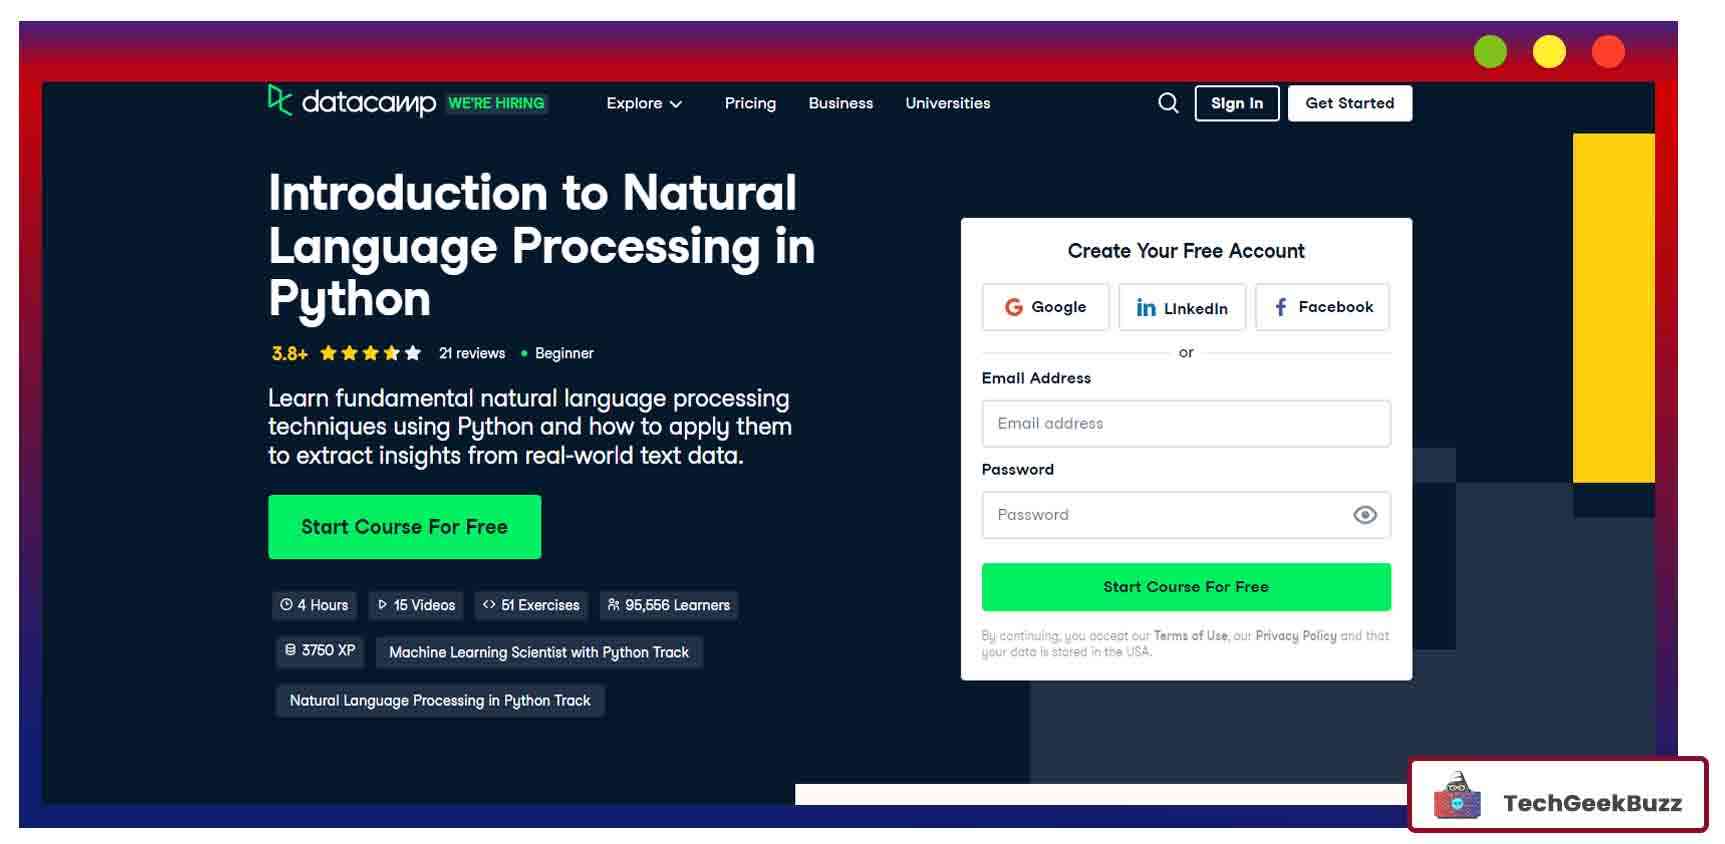  Introduction to Natural Language Processing in Python